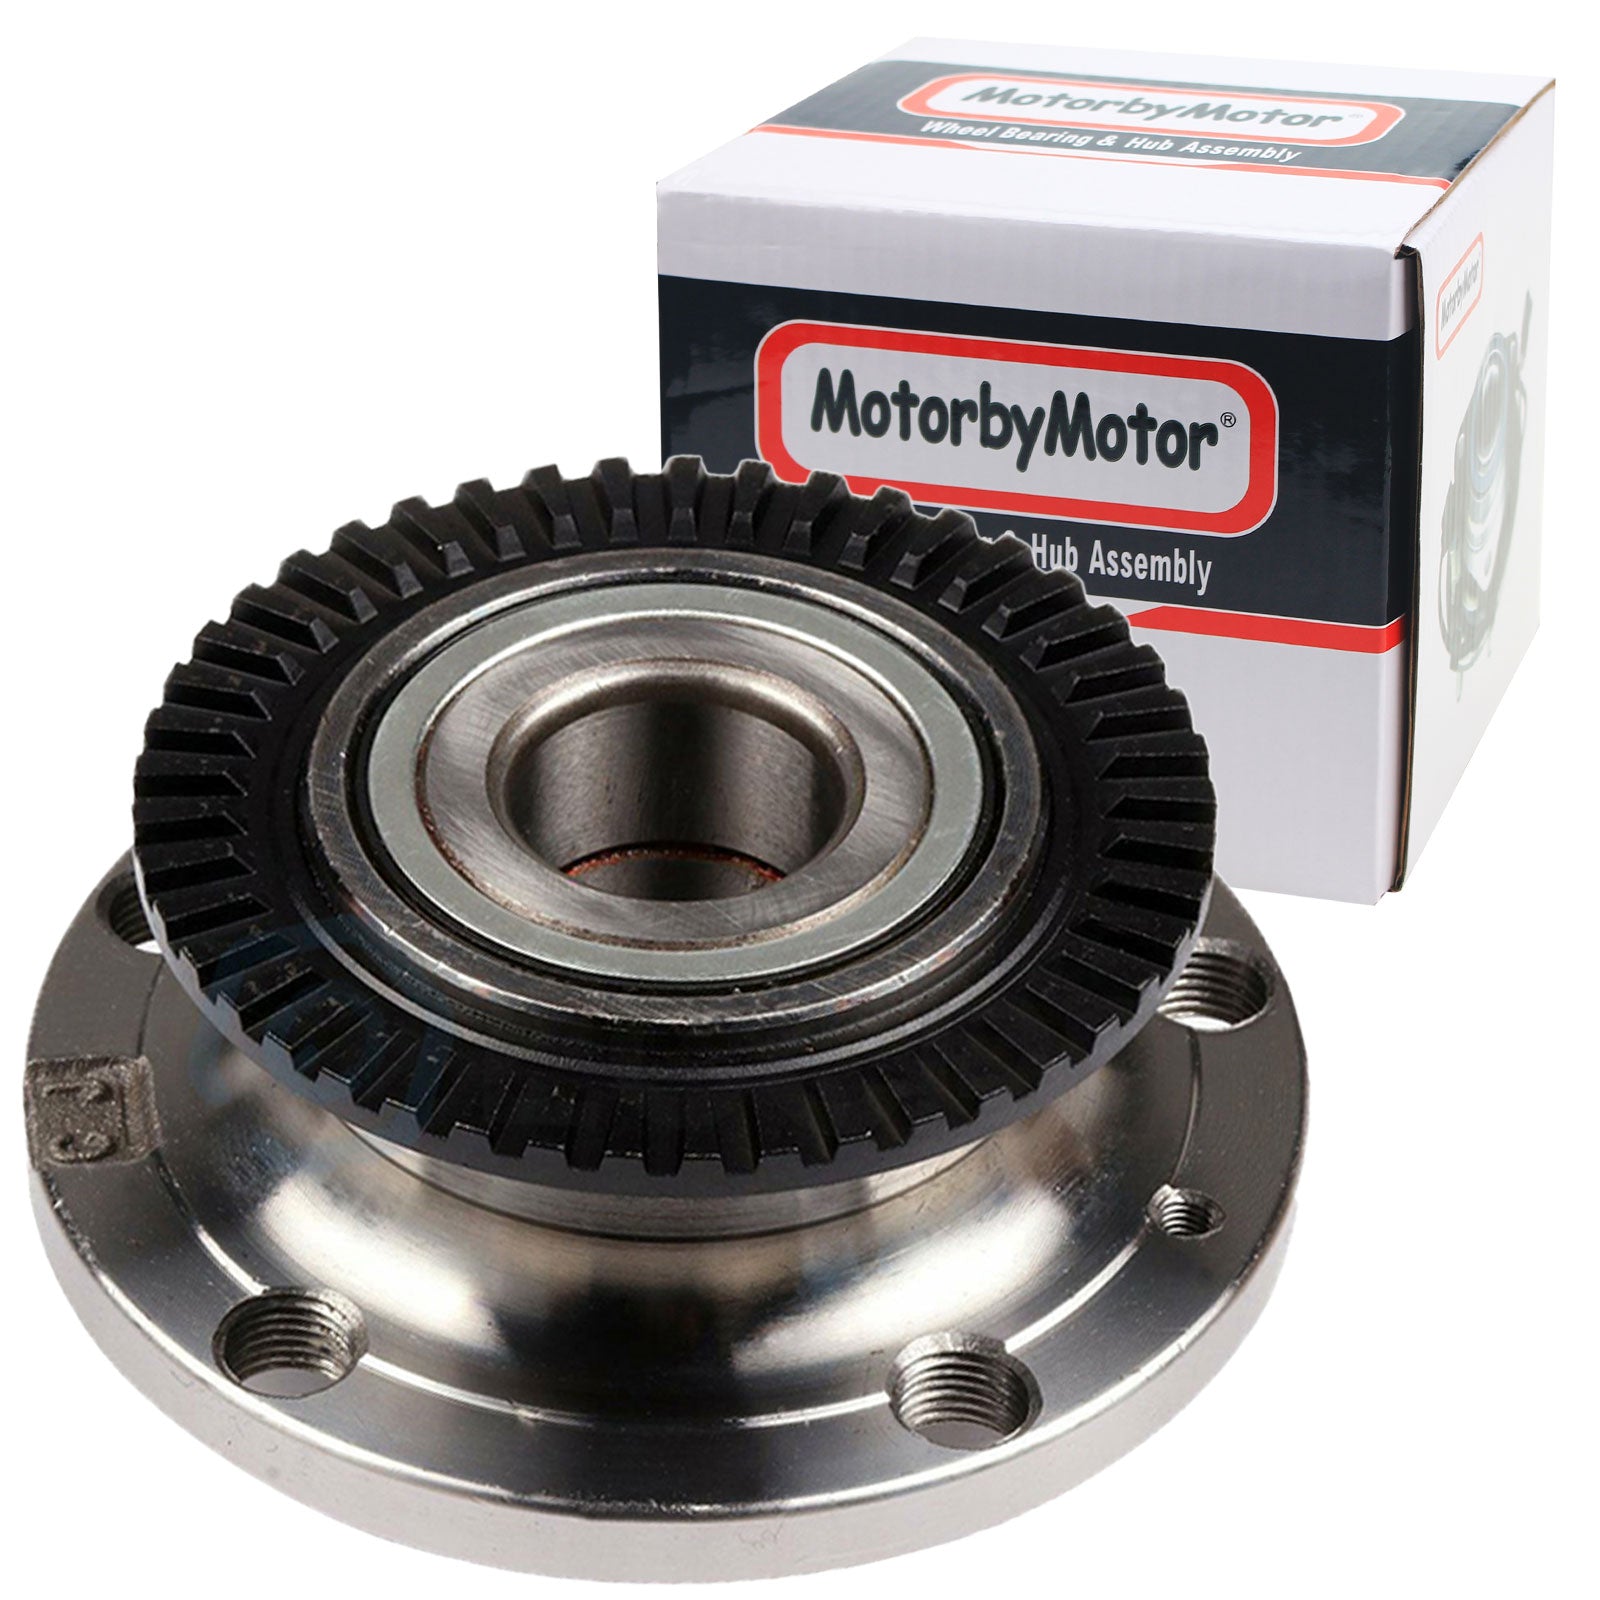 MotorbyMotor 512231 Rear Wheel Bearing and Hub Assembly fits for Audi A4 Low-Runout OE Directly Replacement Hub Bearing FWD MotorbyMotor